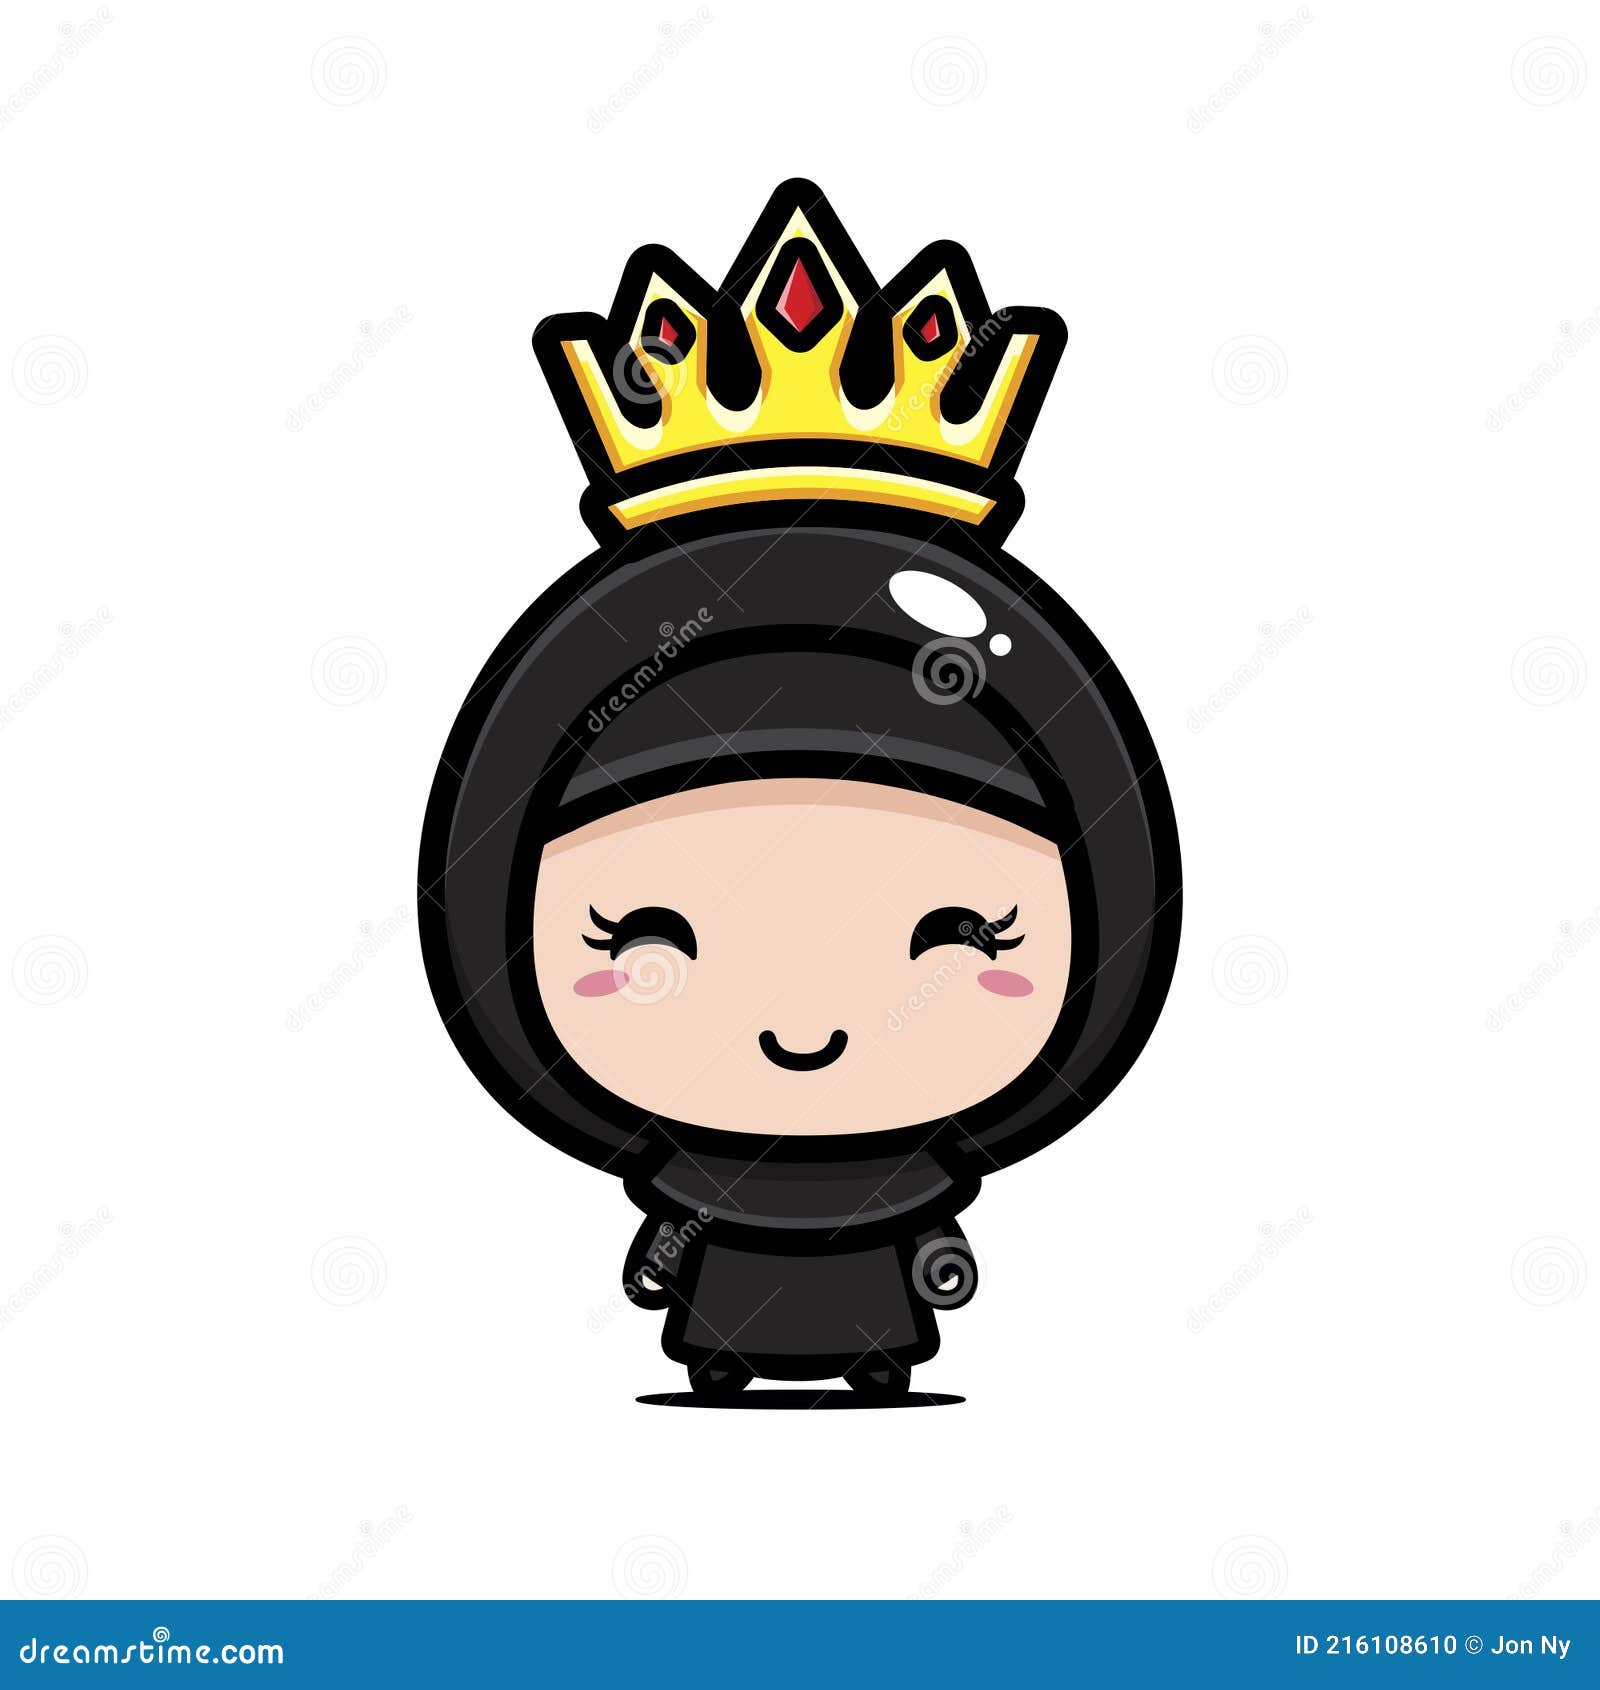 Cute Queen Cartoon Character Wearing Muslim Costume with Veil and Crown  Stock Vector - Illustration of korean, bible: 216108610